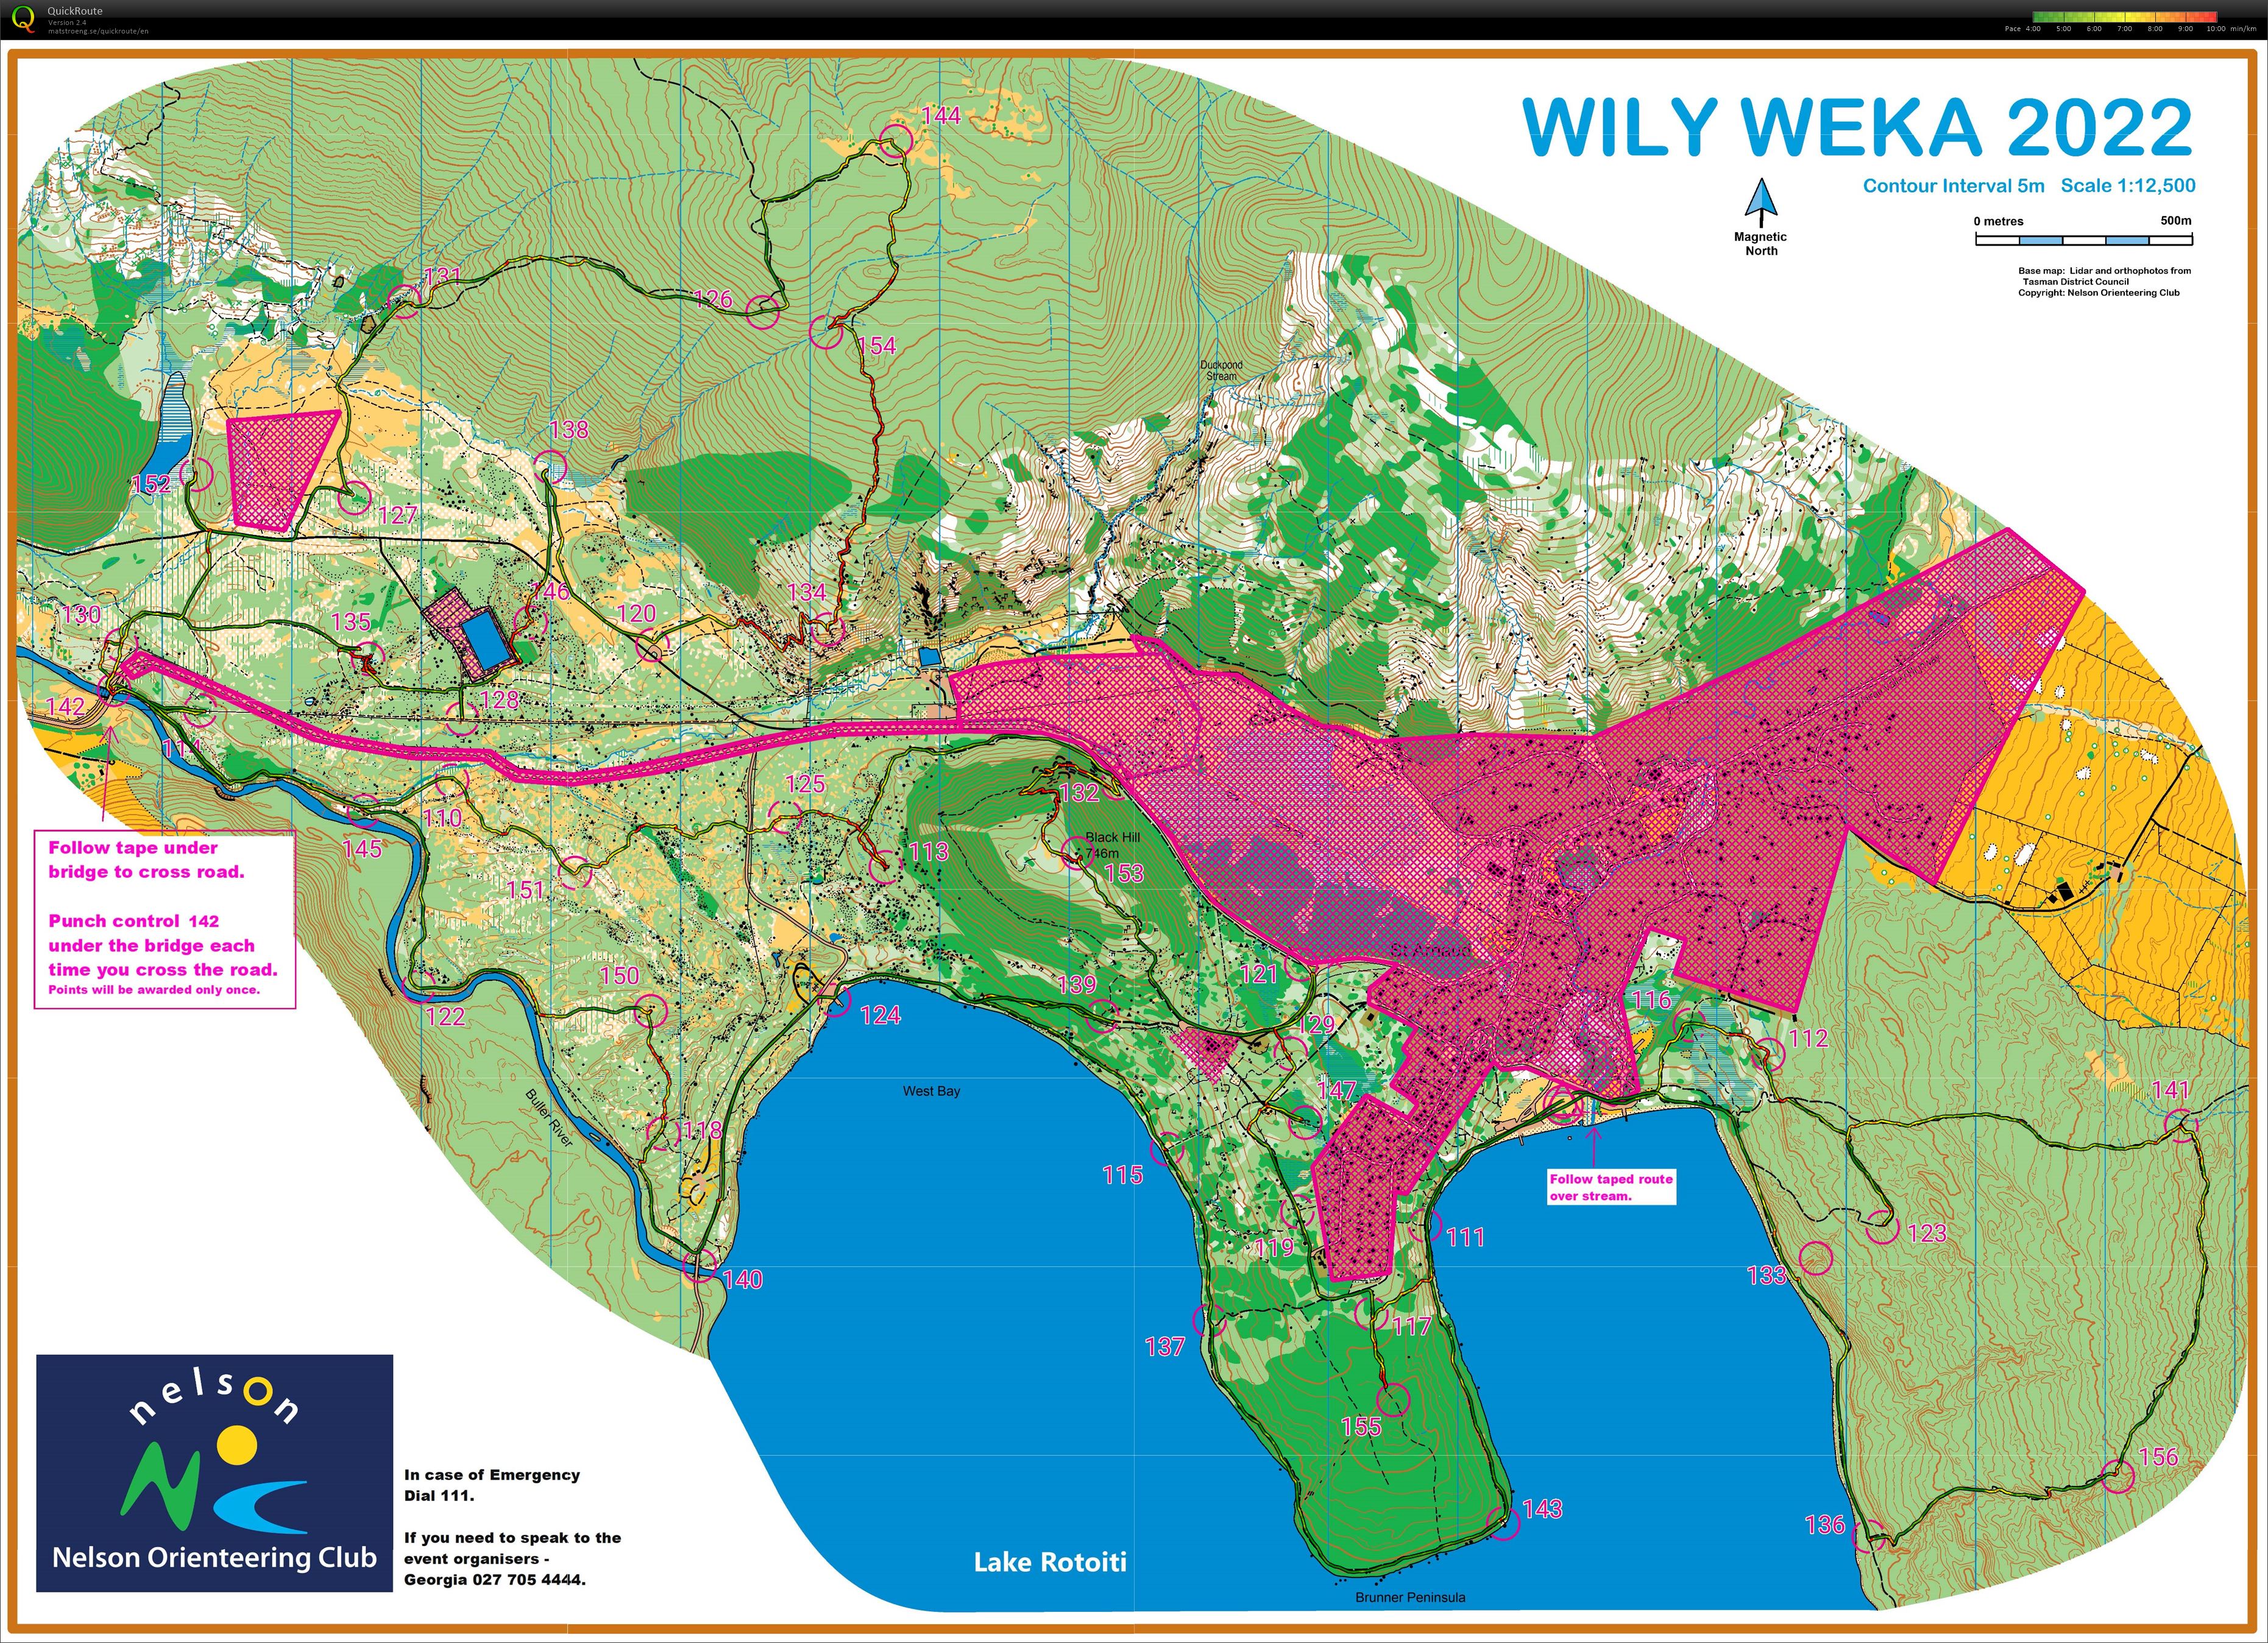 Wily Weka 2022 (2022-09-10)